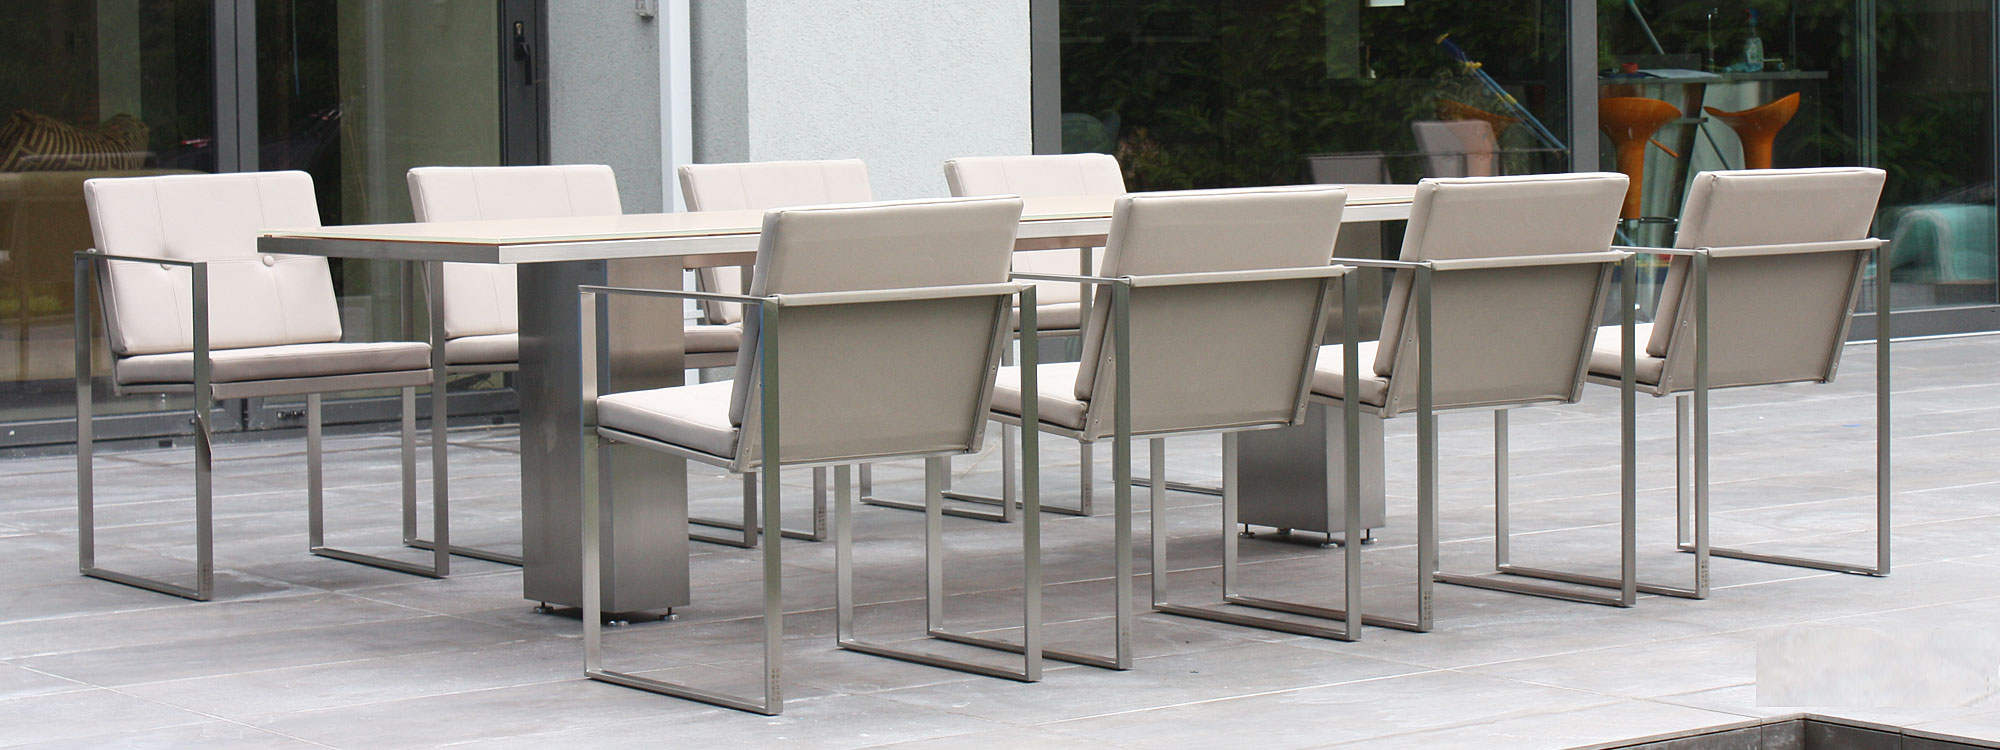 Image of 2010 garden furniture installations including Butaque minimalist garden chairs & Doble linear garden table by FueraDentro